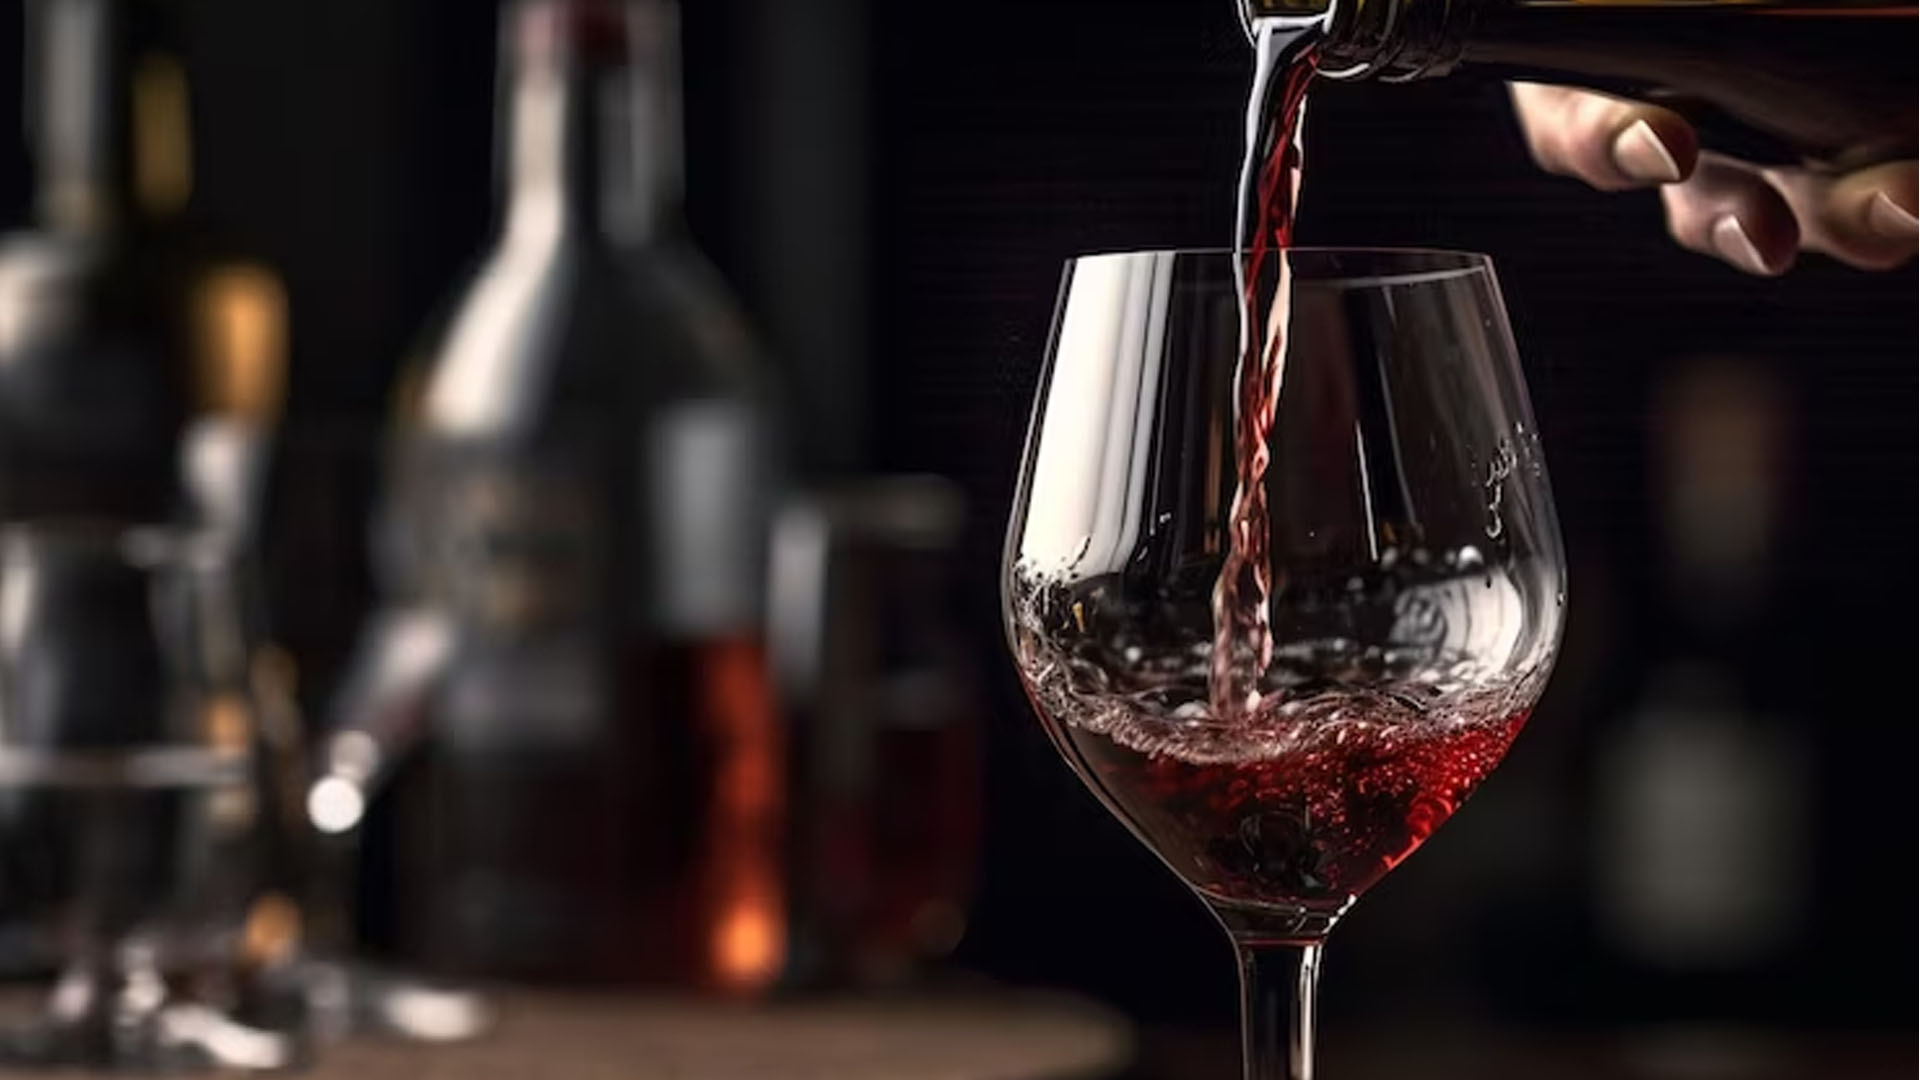 What Is Dealcoholized Red Wine?